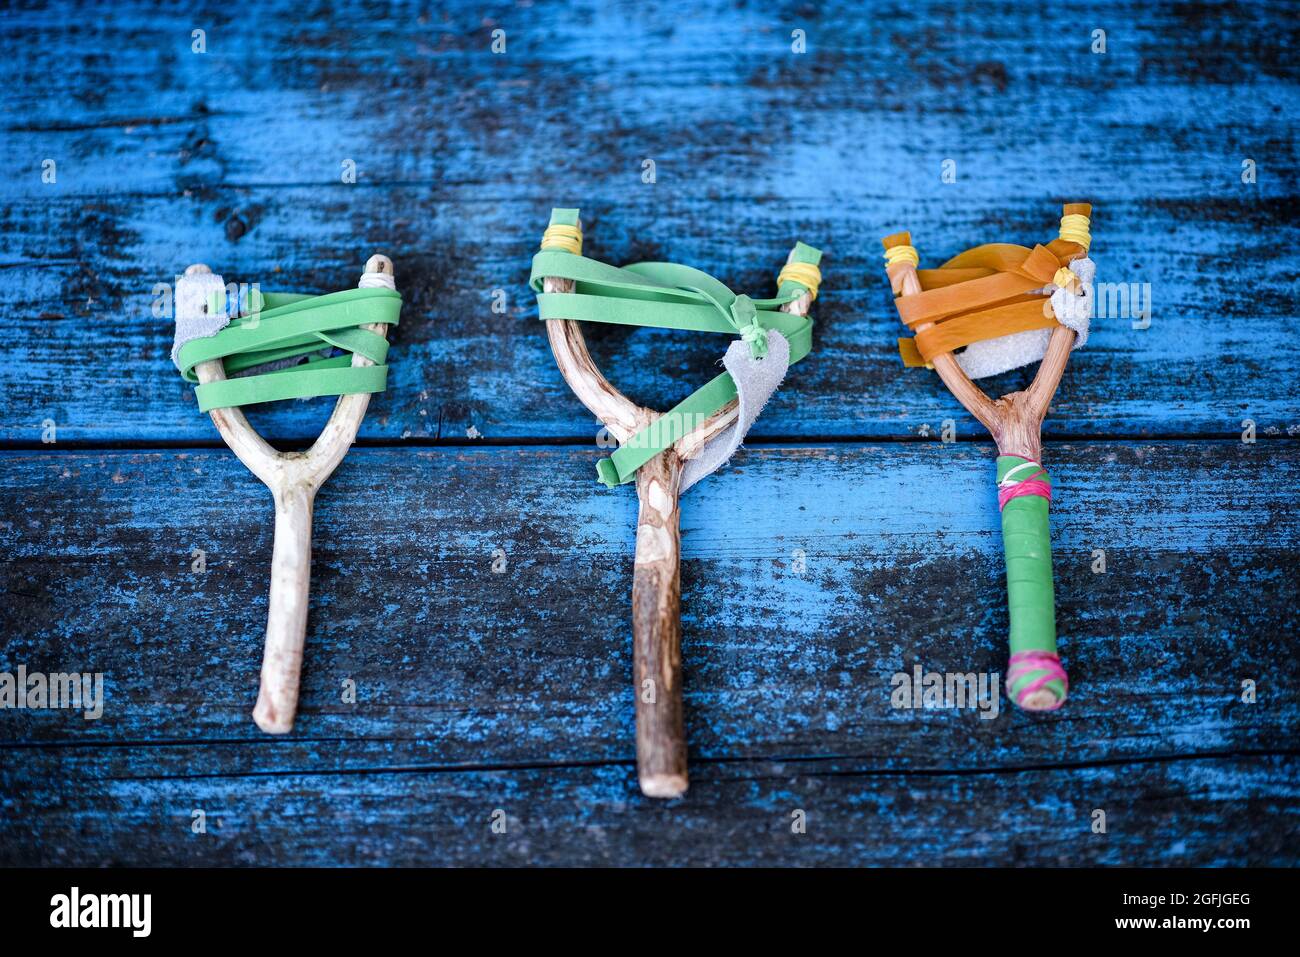 Three rustic handmade catapults or slingshots made of wooden branches with strips of elastic rubber displayed lying flat on a blue wooden plank backgr Stock Photo